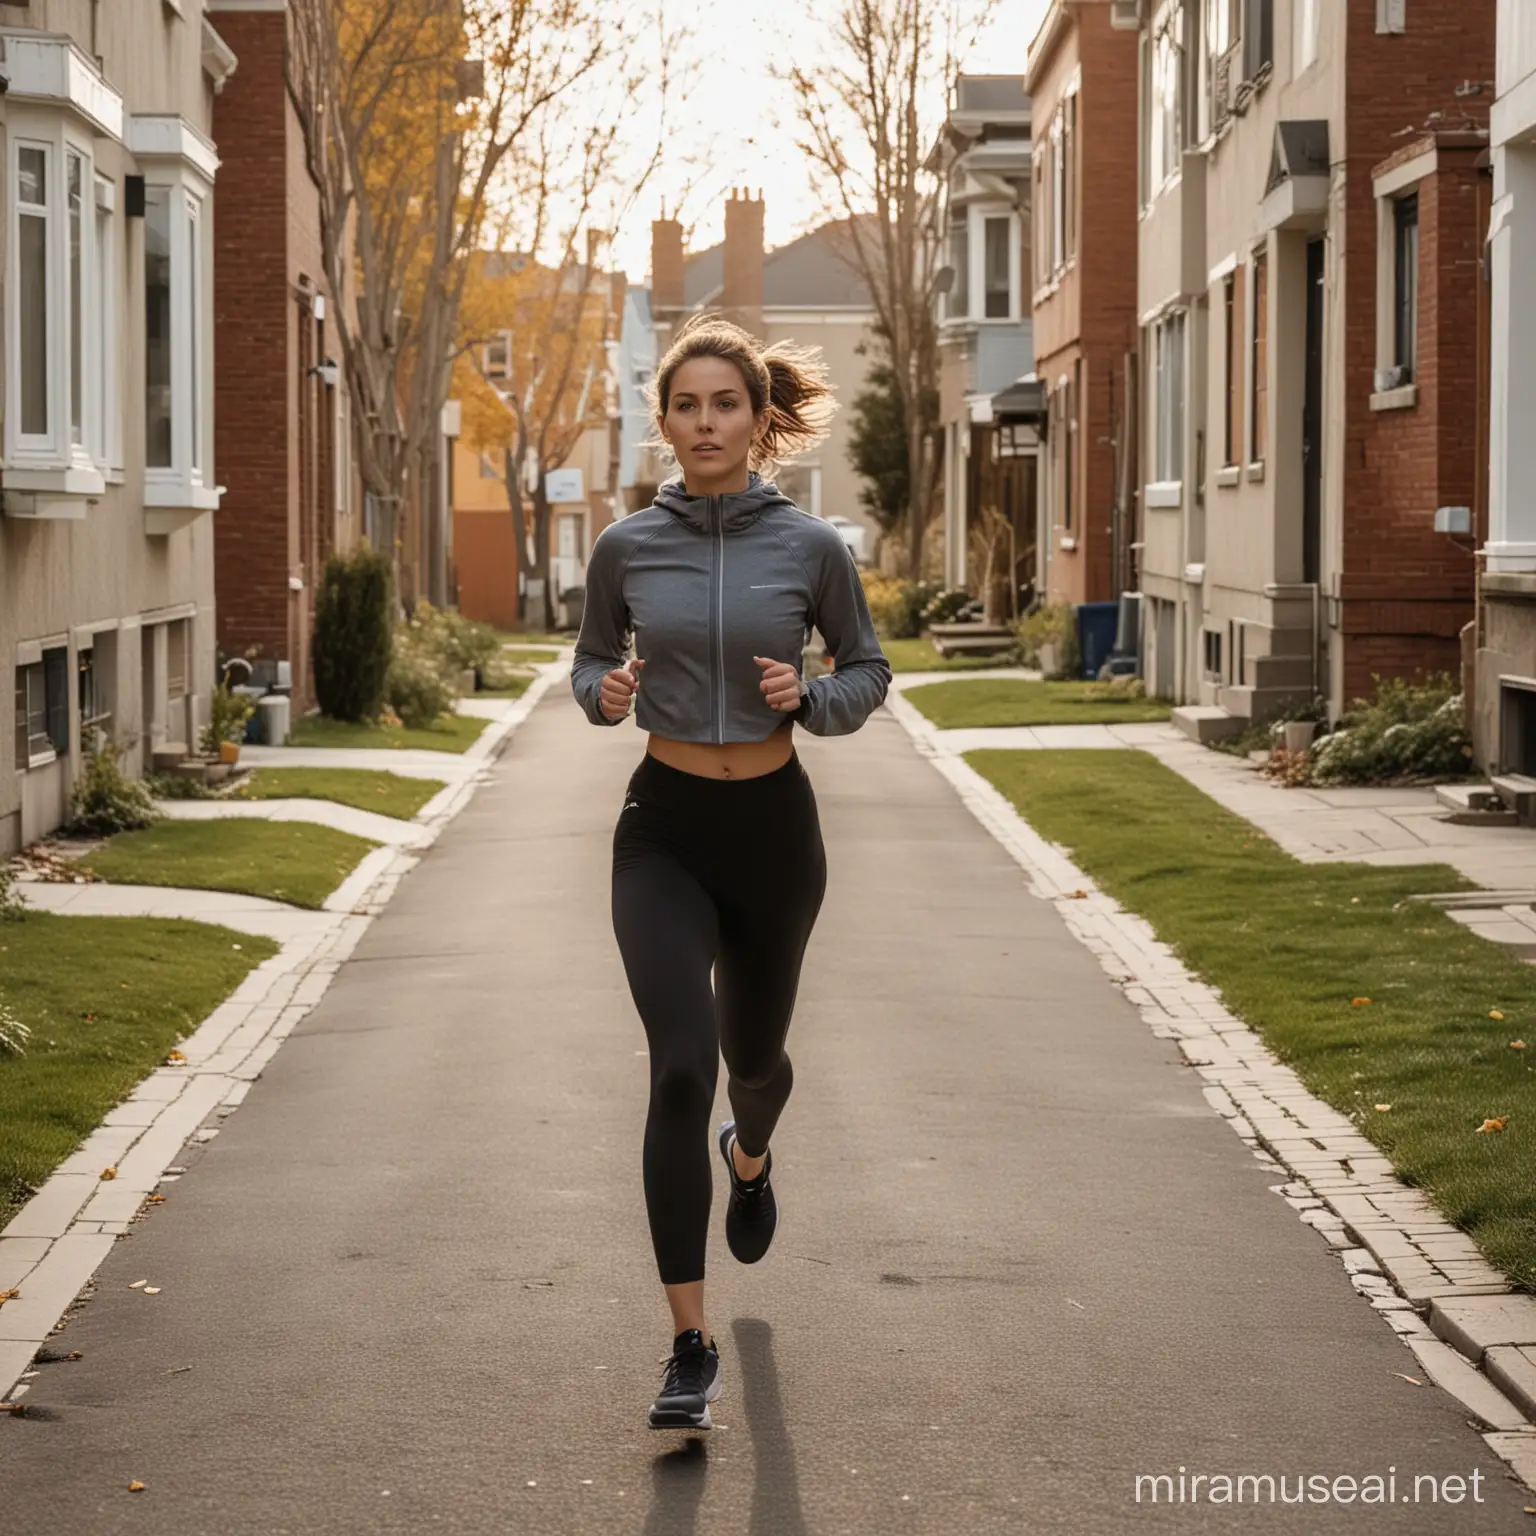 Healthy Lifestyle Jogging in a Picturesque Neighborhood